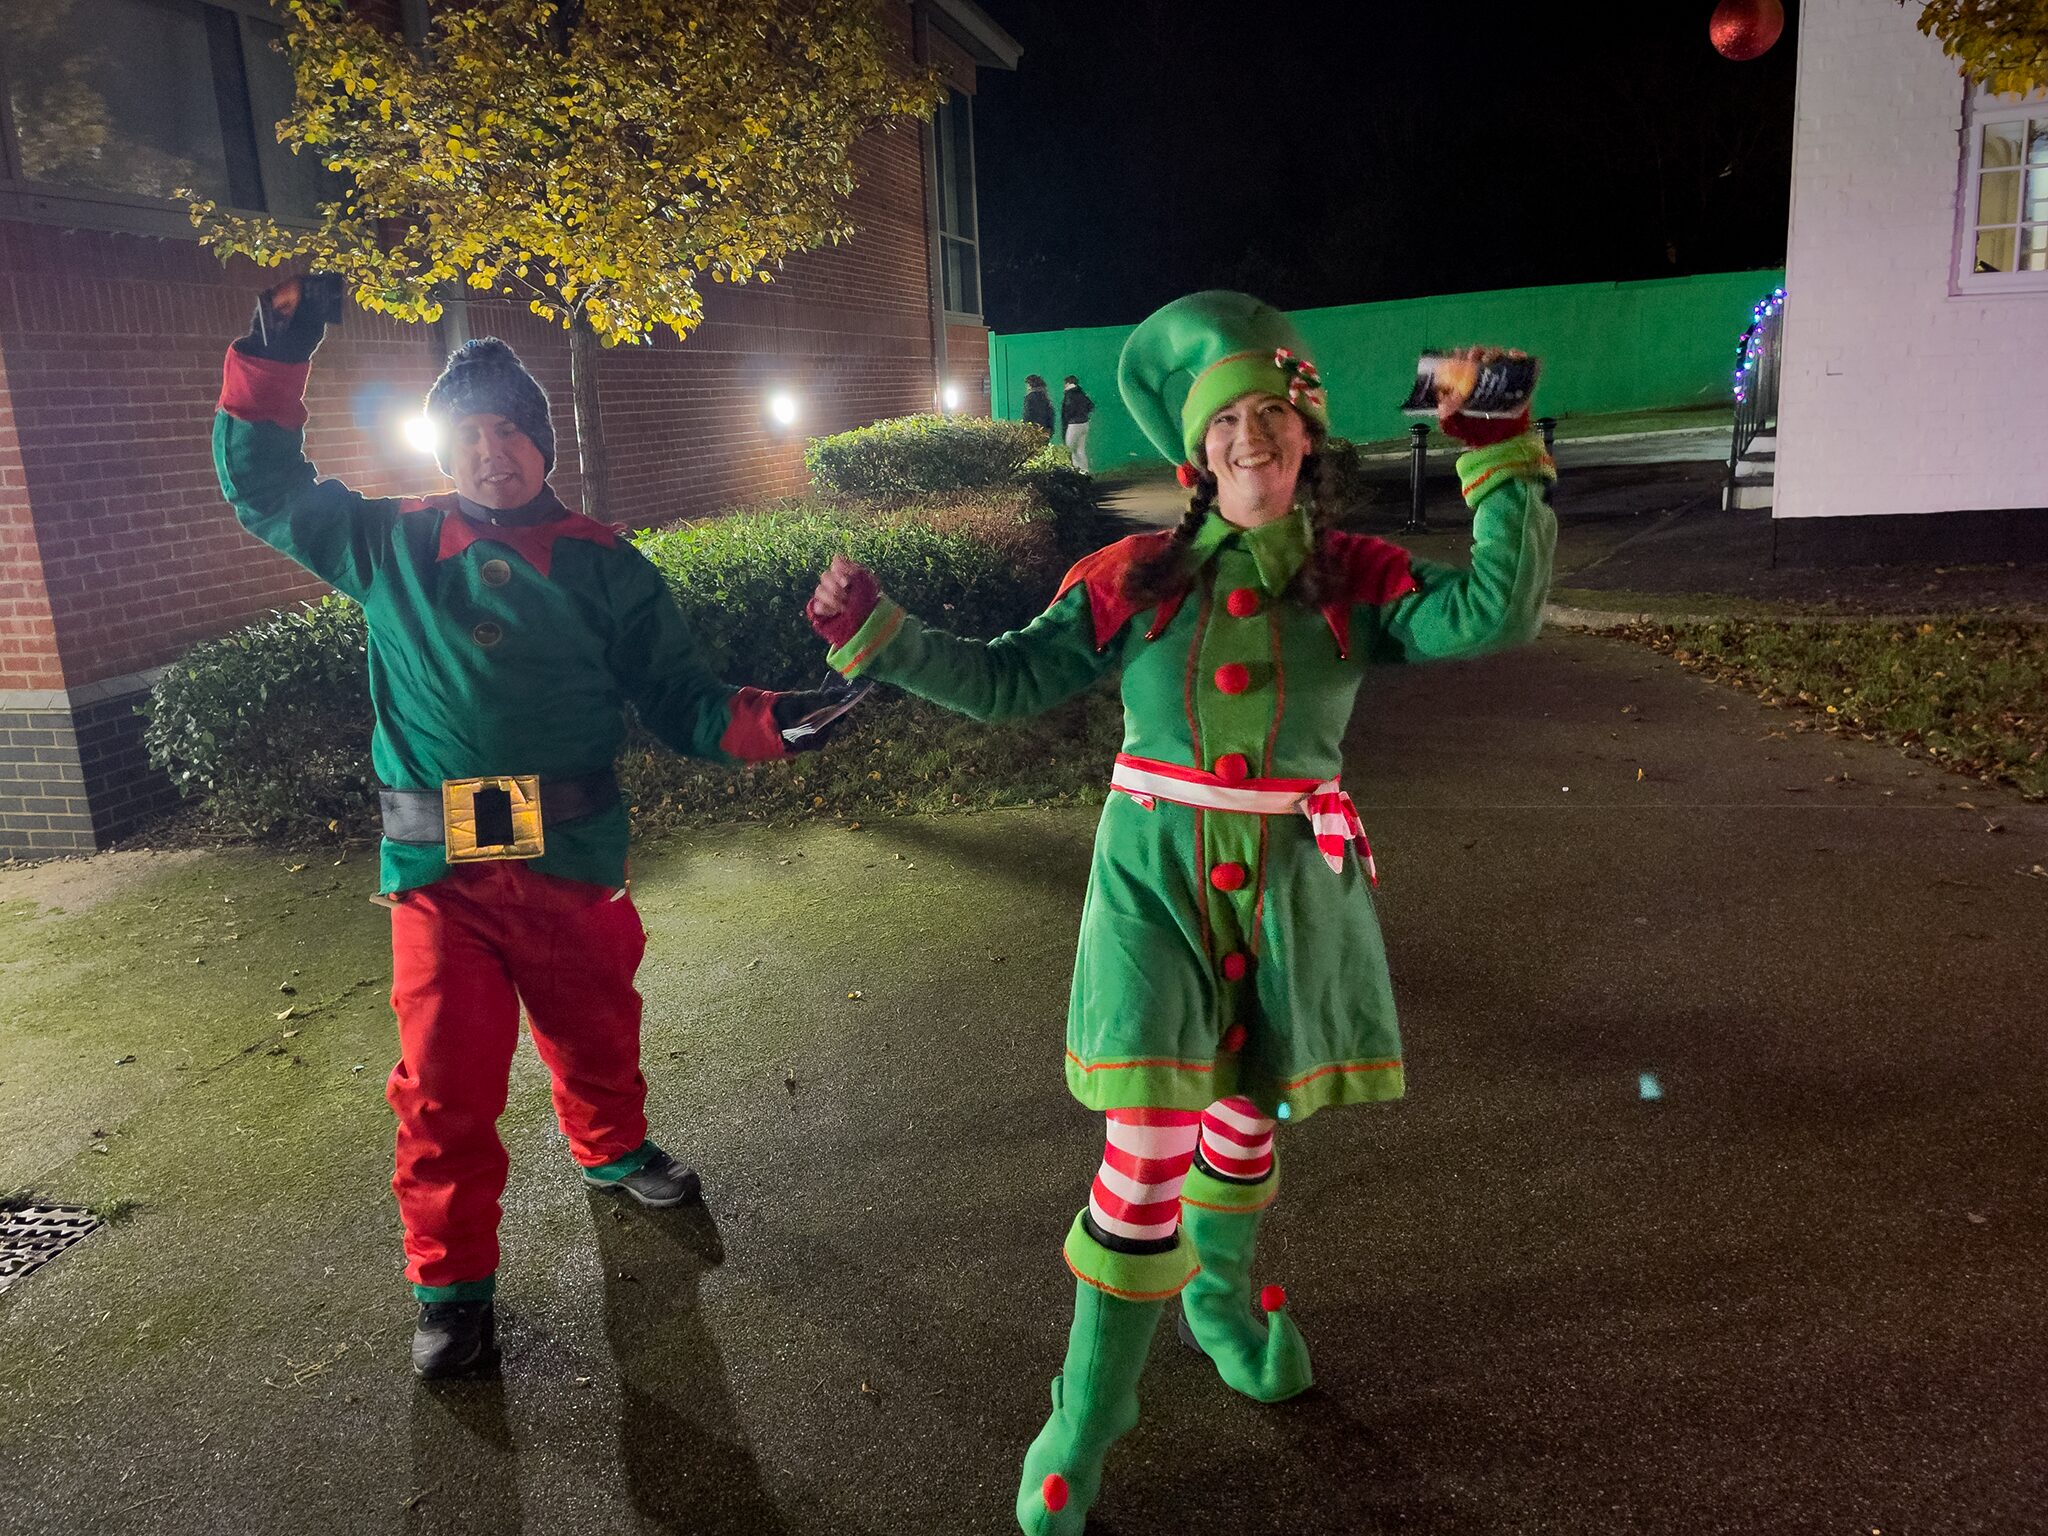 Our Lewis Brownlee elves bust a groove!